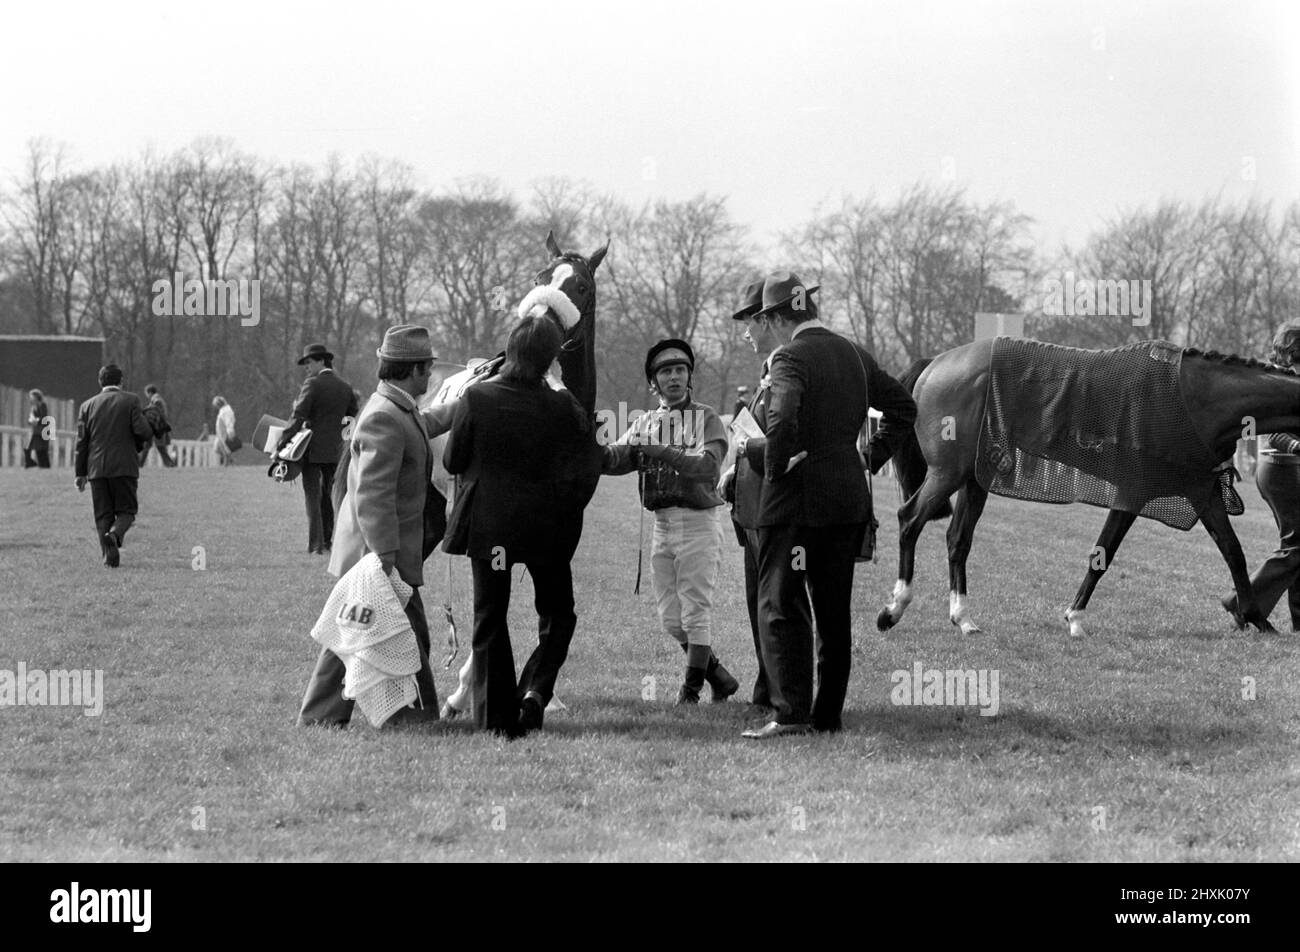 Jockey Willie Carson. 'All the Queens Horses'. At West Ilsley, Berks trainer Major W. R. Hern stands in front of the 13 horses for the Queen. Left to right: Back row Star Harbour; Circlet; Alma; Tartan Pimpernell; Dunfermline; and Mary Fitton. Front row: Valuation; Chain of Reasoning; Fife and Drum; Duke of Normandy; Rhyme Royal; Gregarious and Paintbrust. The man 2nd from right is Stan Clayton former jockey for the Queen. April 1977 77-02213-001 Stock Photo